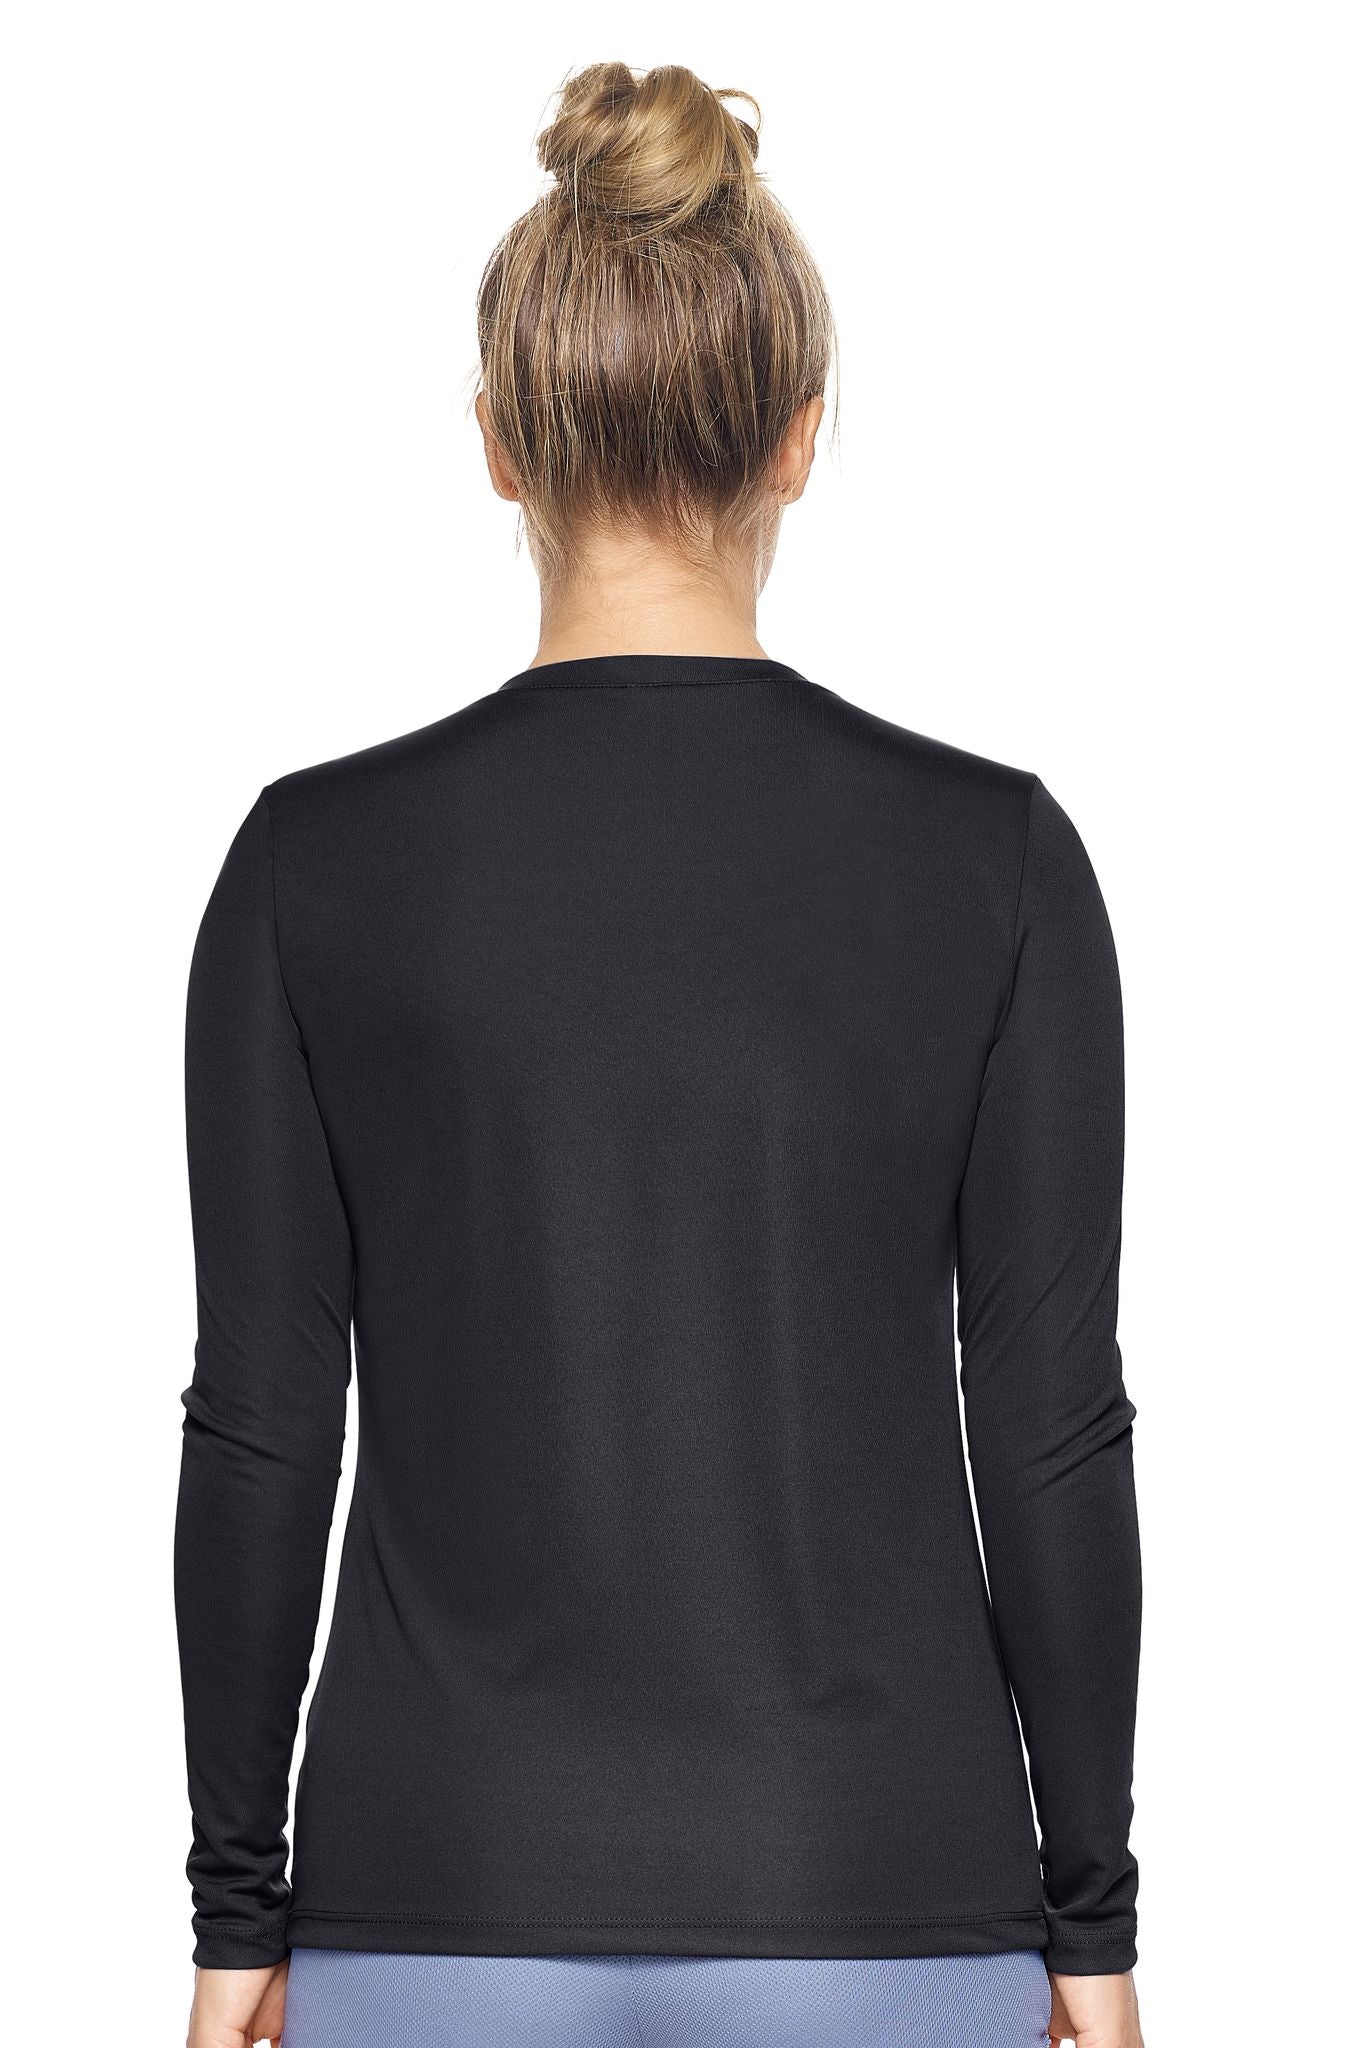 Expert Brand Retail Womens Activewear Womens Sportswear Made in USA Long Sleeve Tec Tee Runners Tee V Neck black 3#color_black